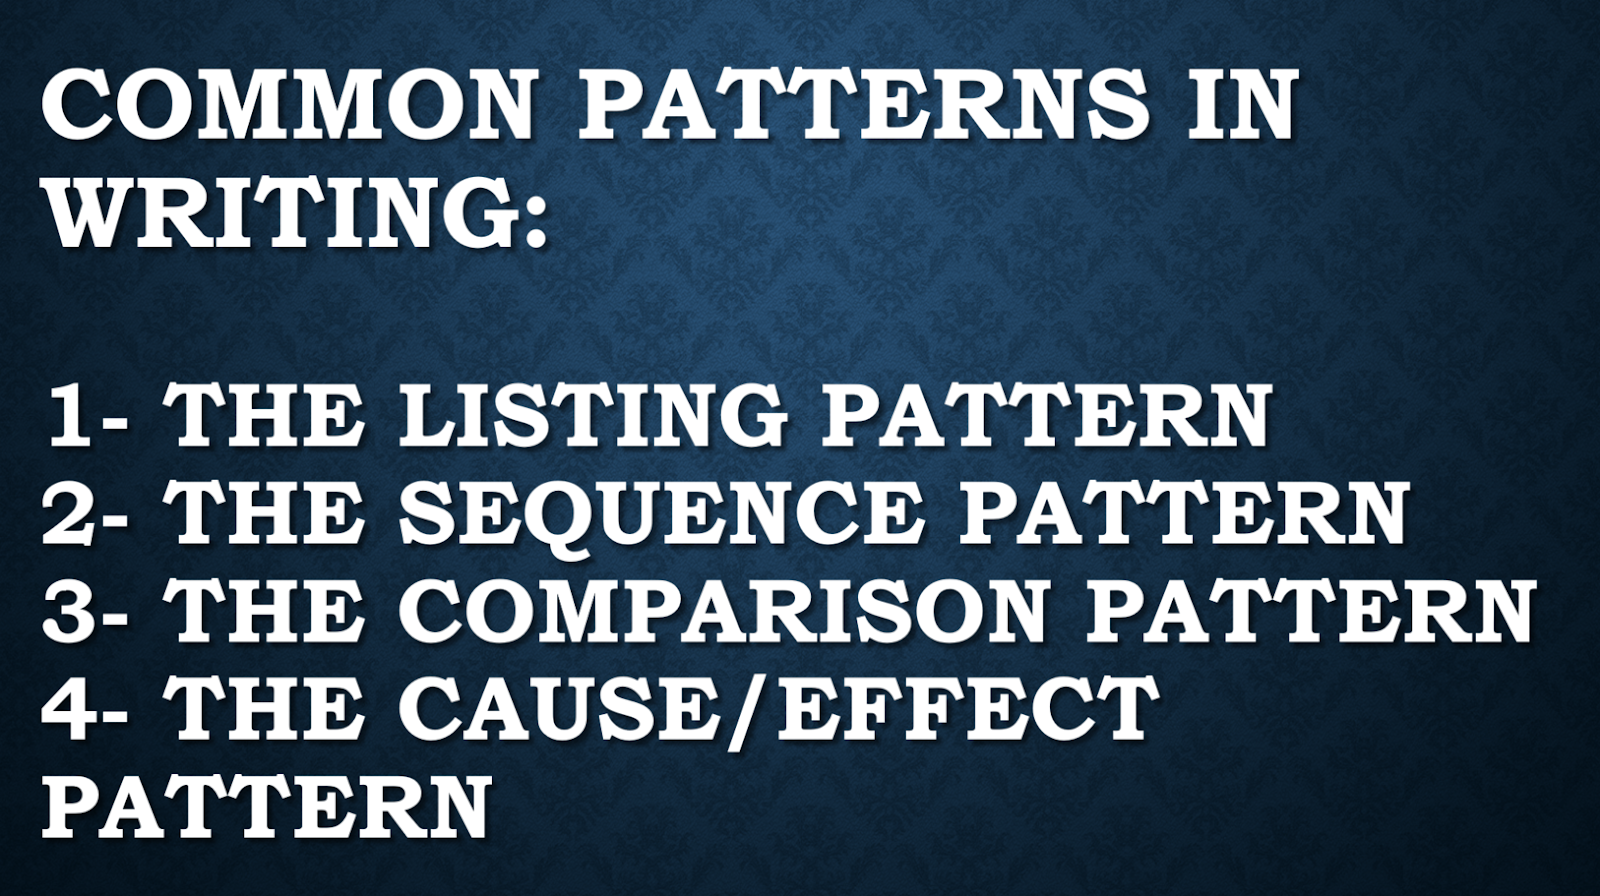 The common patterns in writing